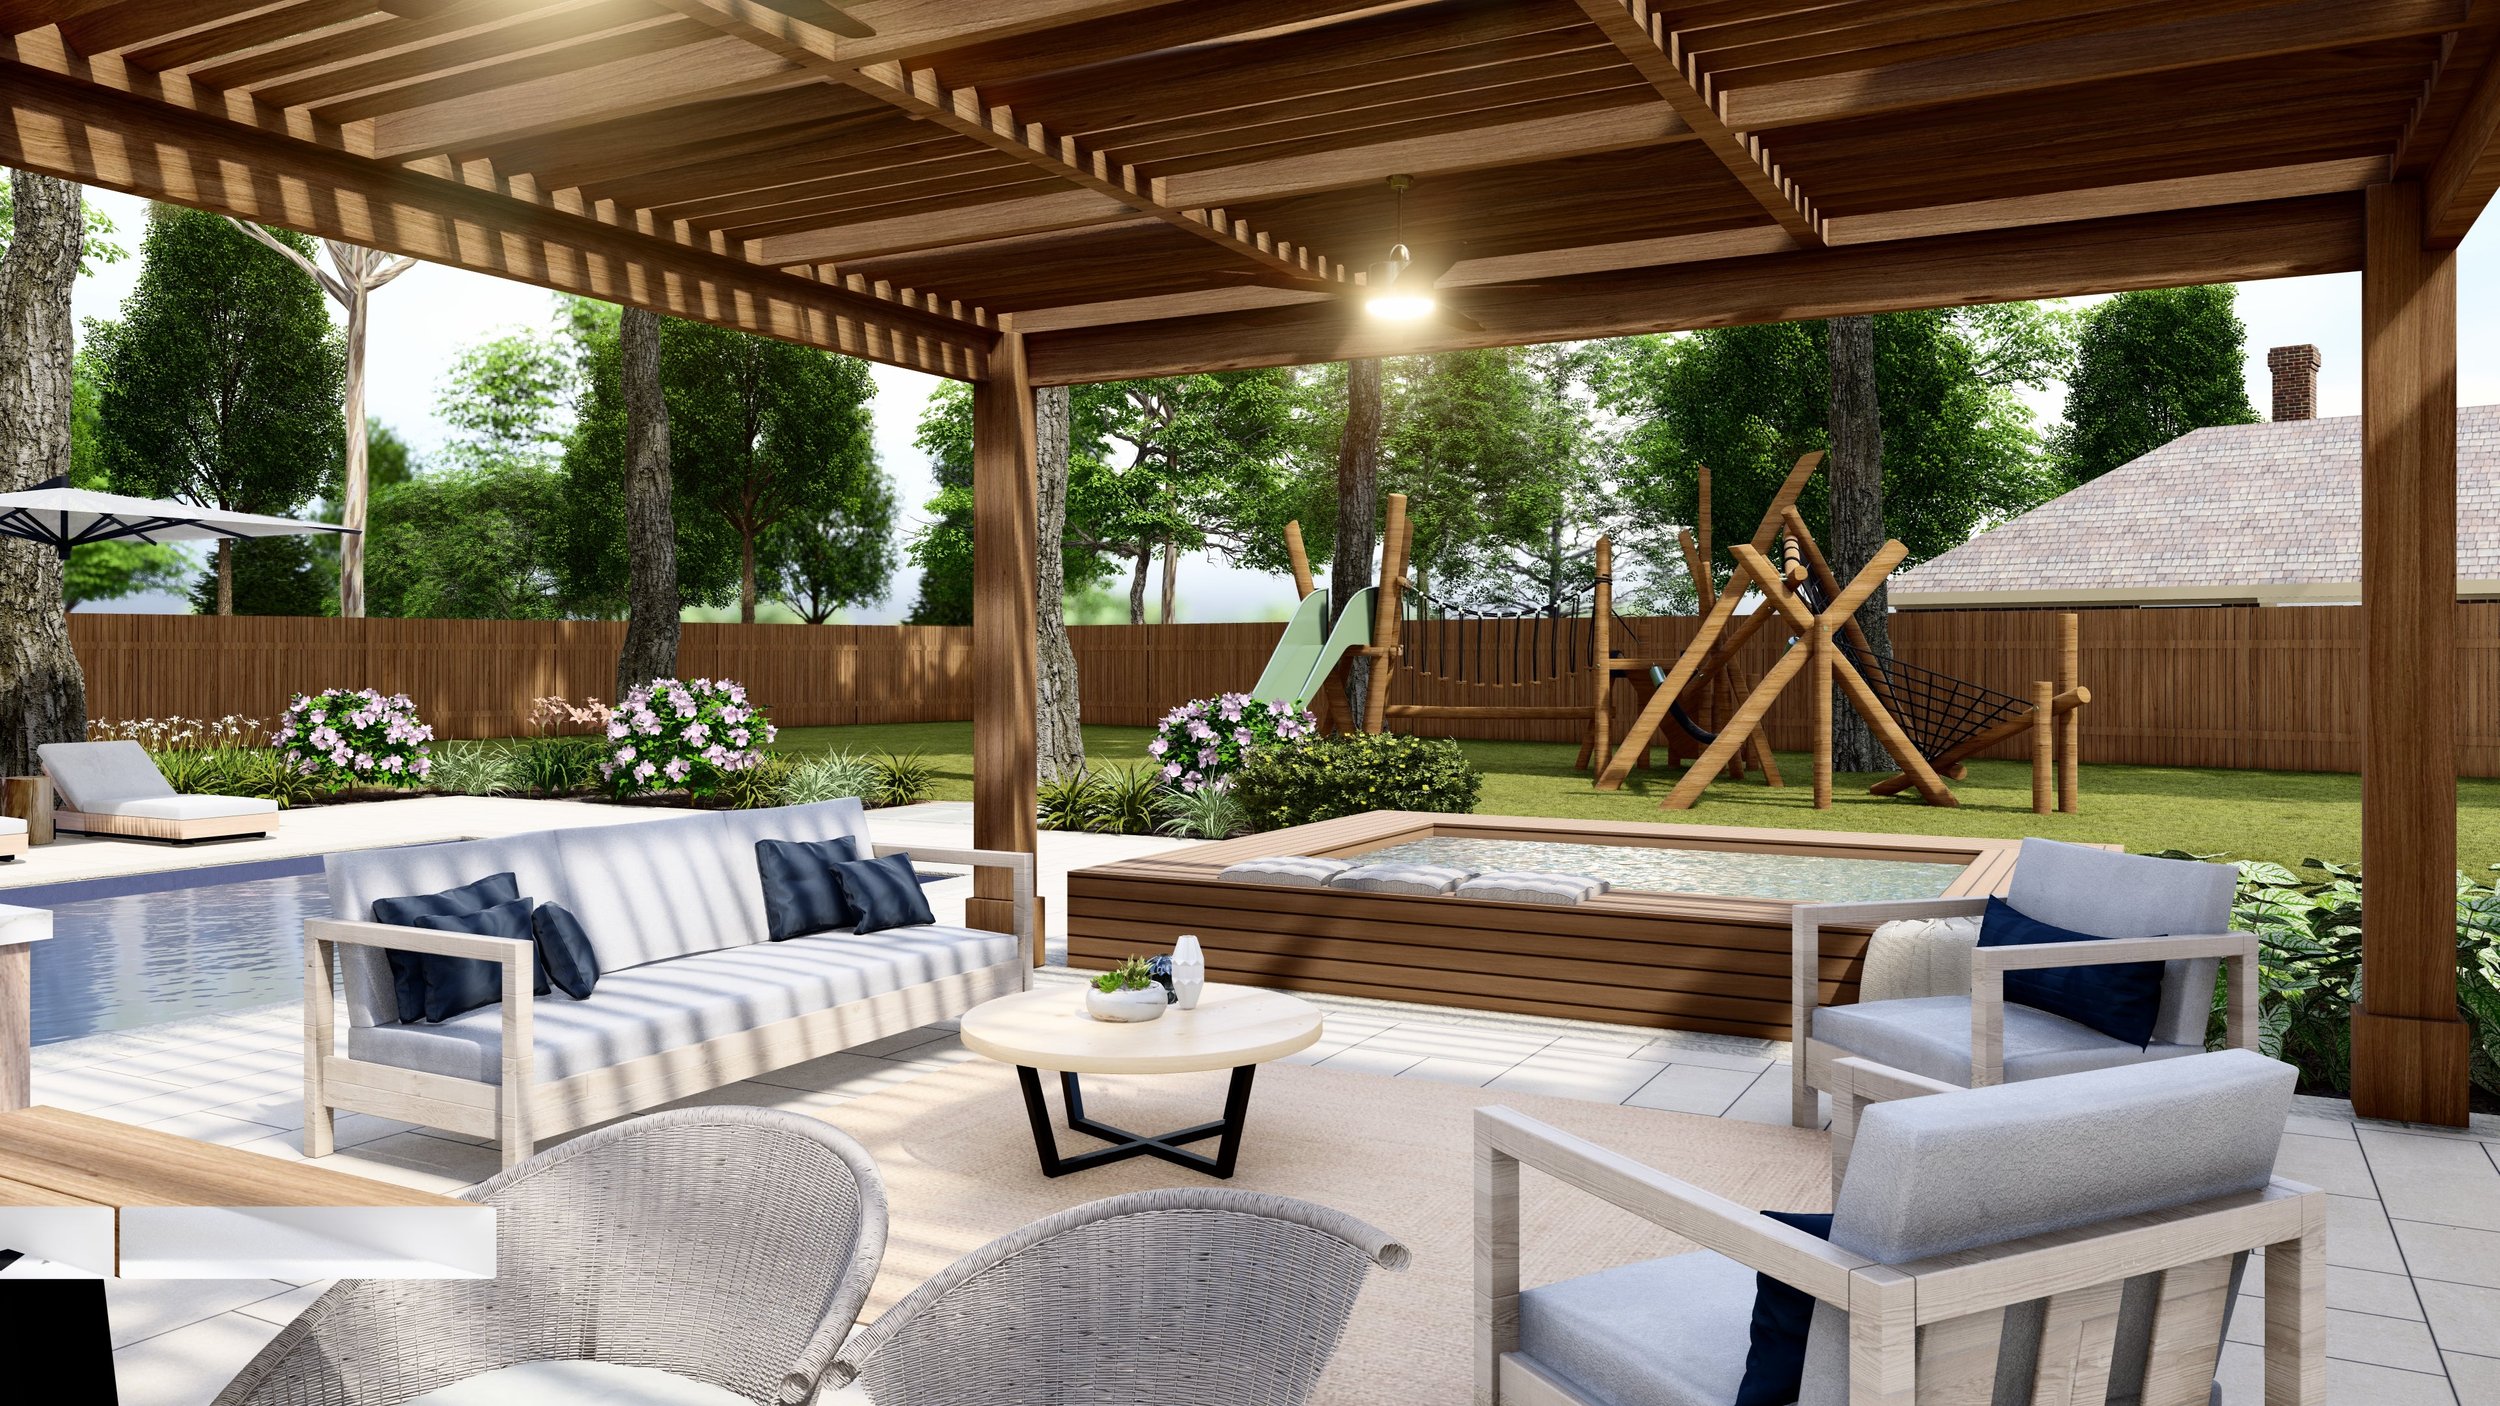 A backyard design with seating area covered by pergola, above ground plunge pool with decked seating, and traditional pool with play area in background.